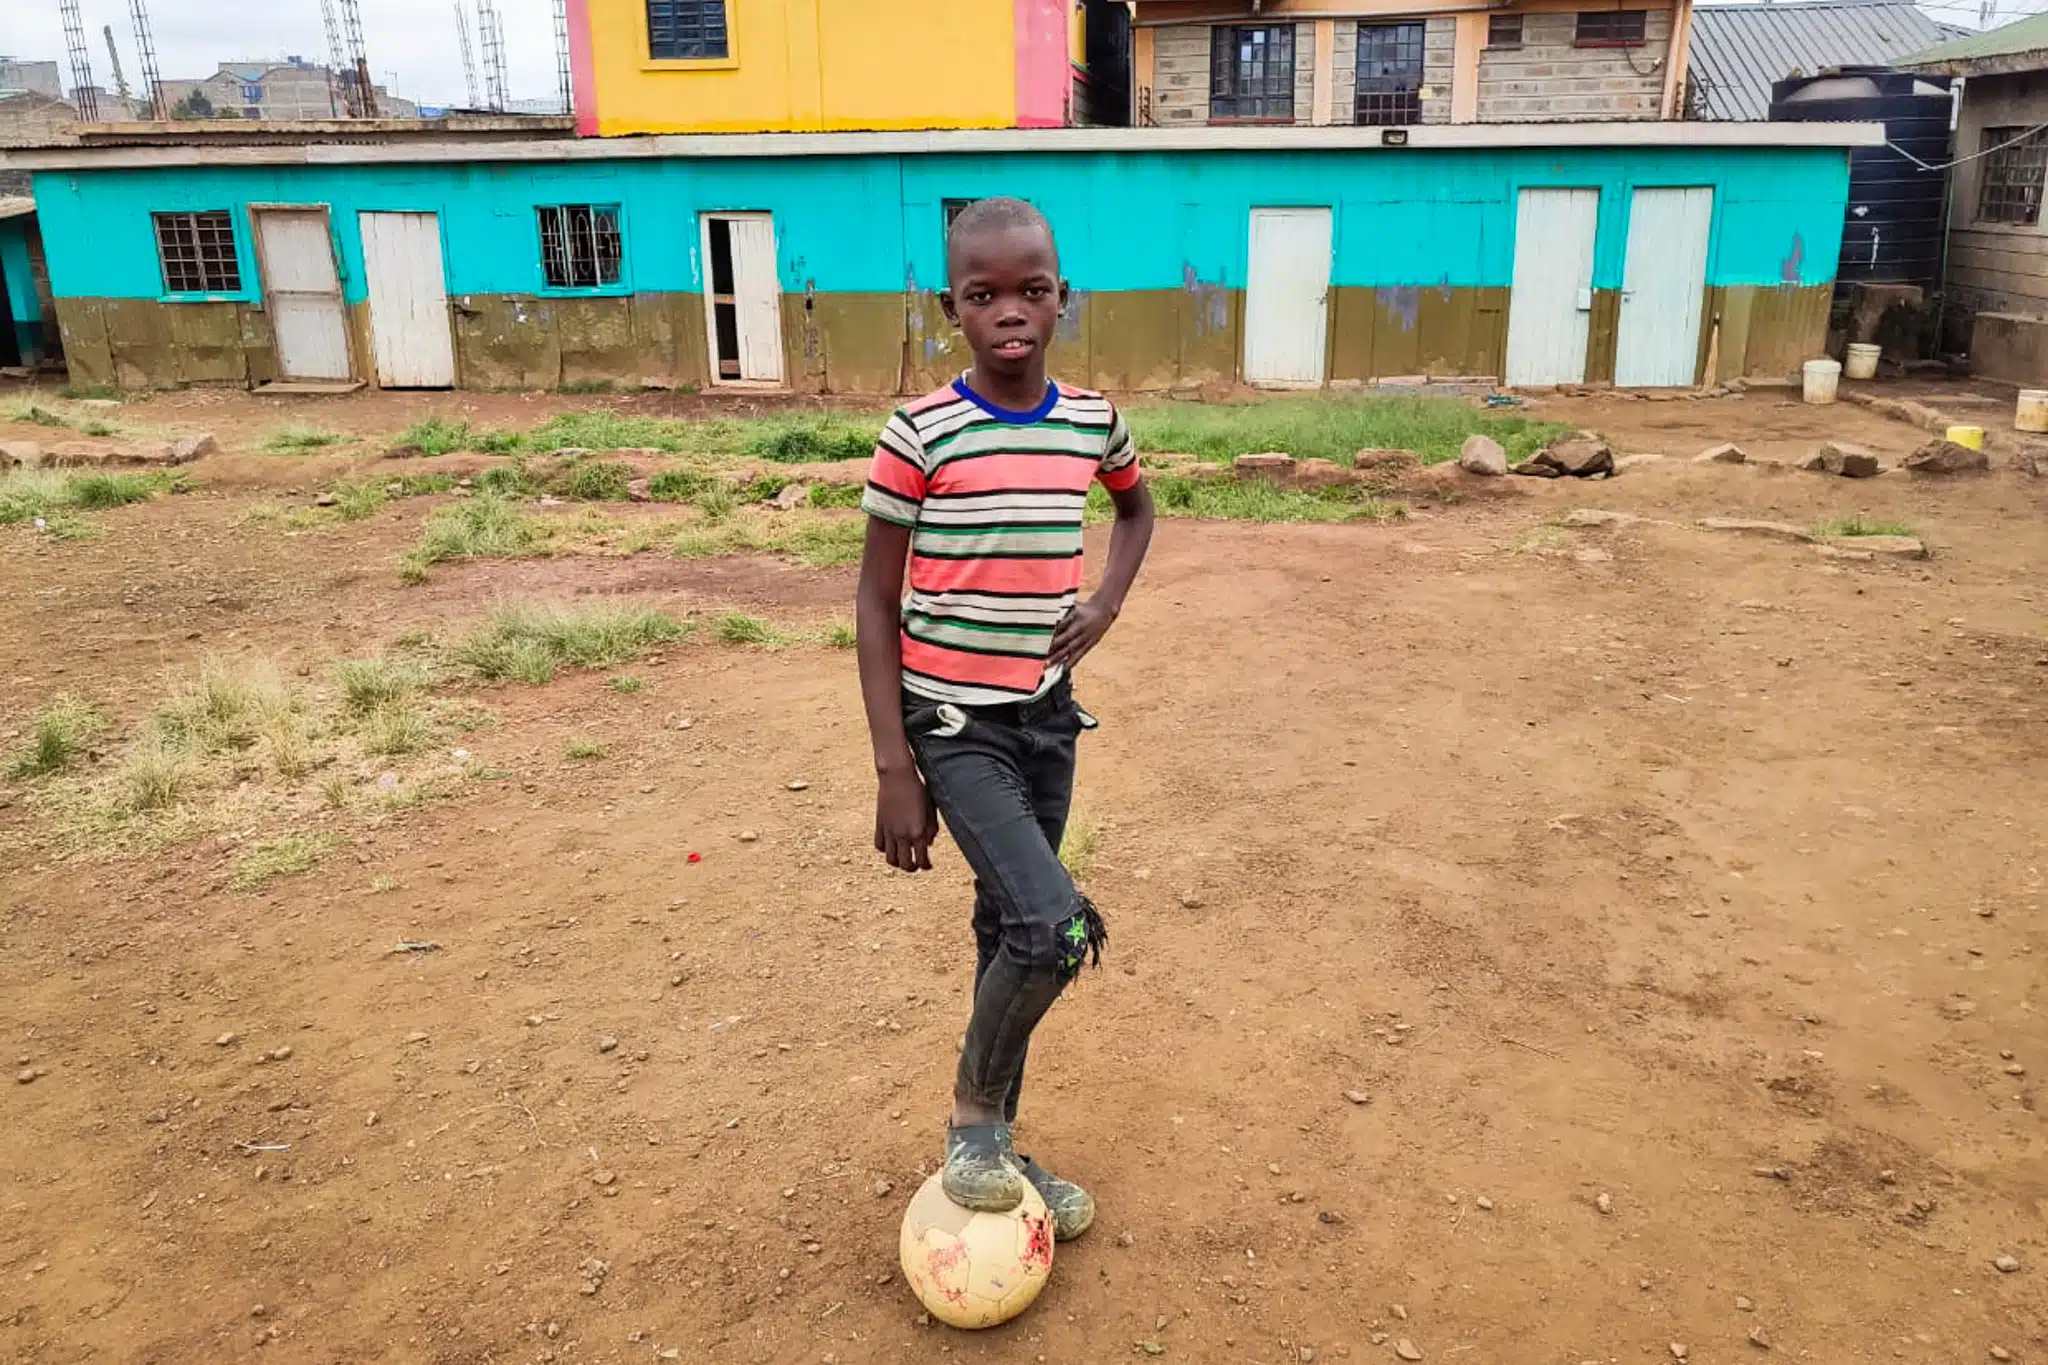 Francis — one of Convoy of Hope's Children's Feeding participants — poses with his soccer ball.